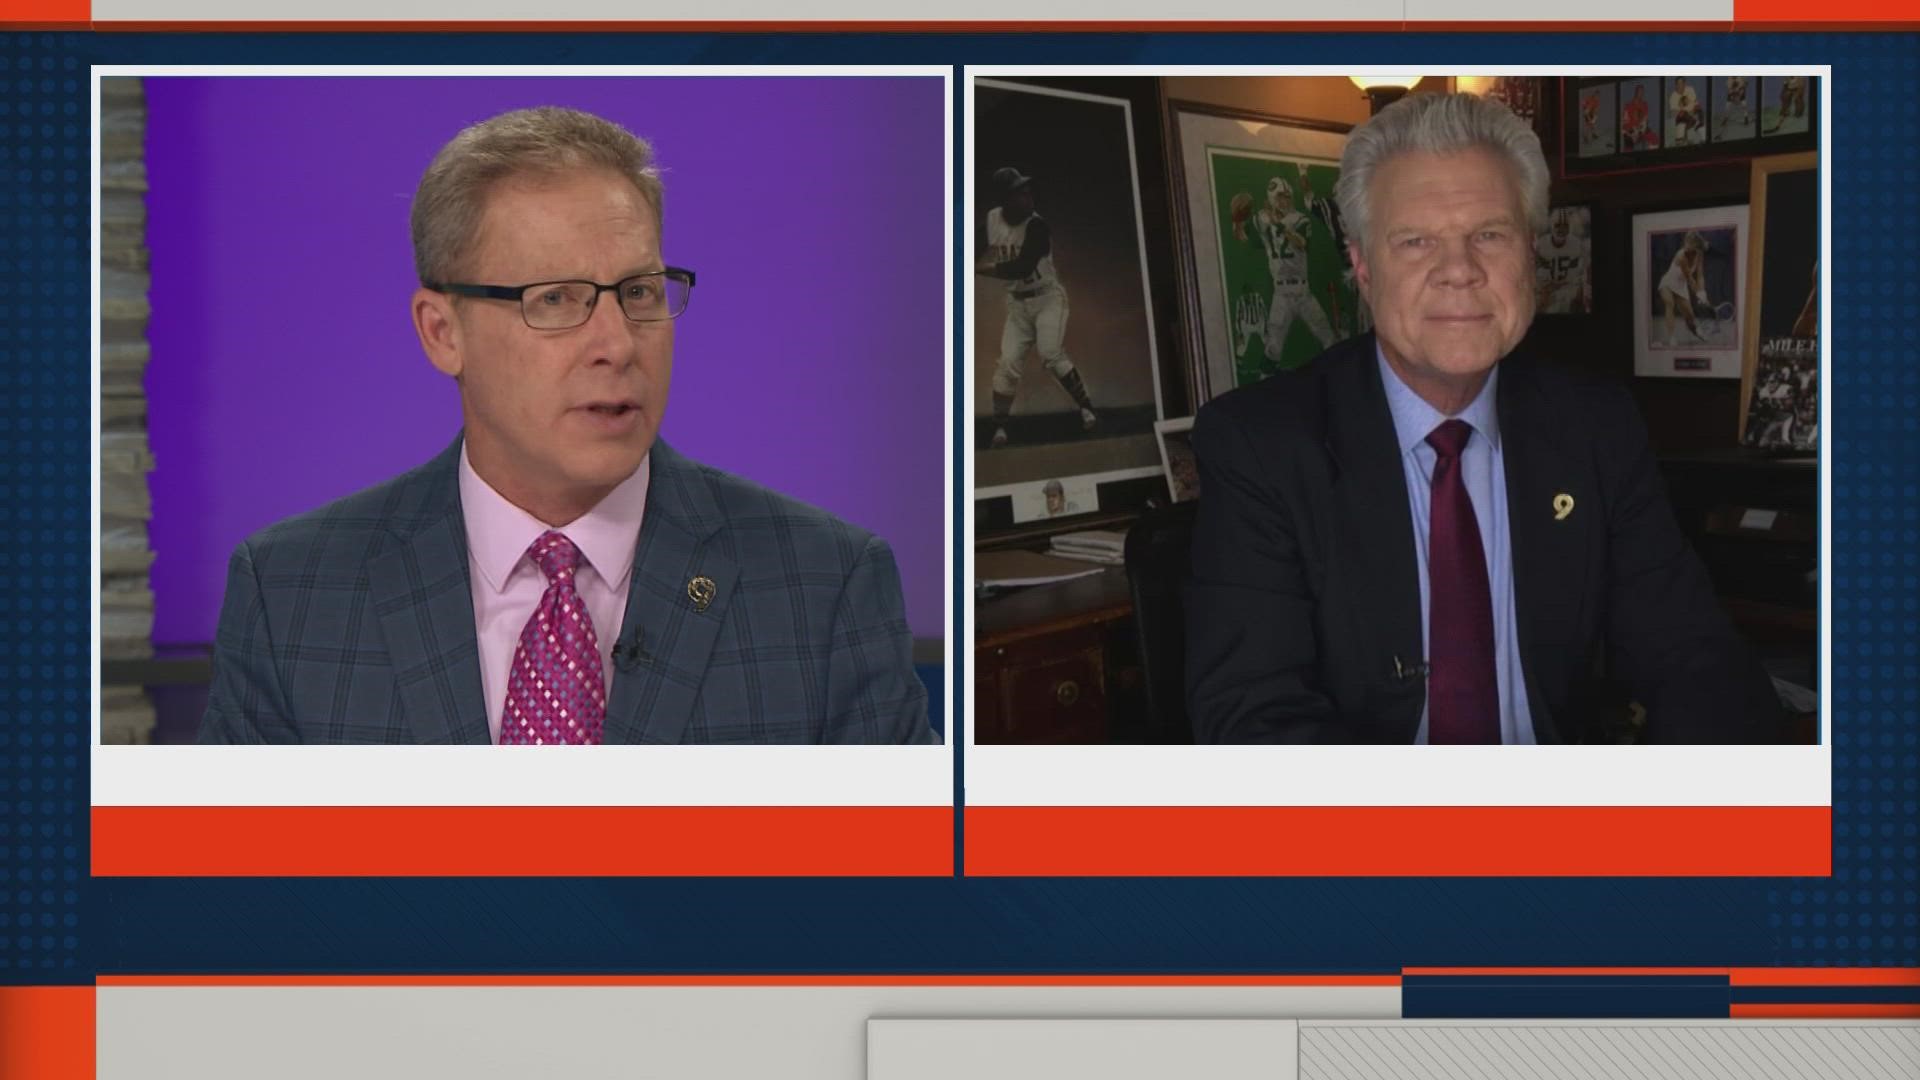 Mike Klis joined Rod Mackey live on 9NEWS to give his latest on the Denver Broncos' search for a new owner, plus his observations from rookie minicamp.